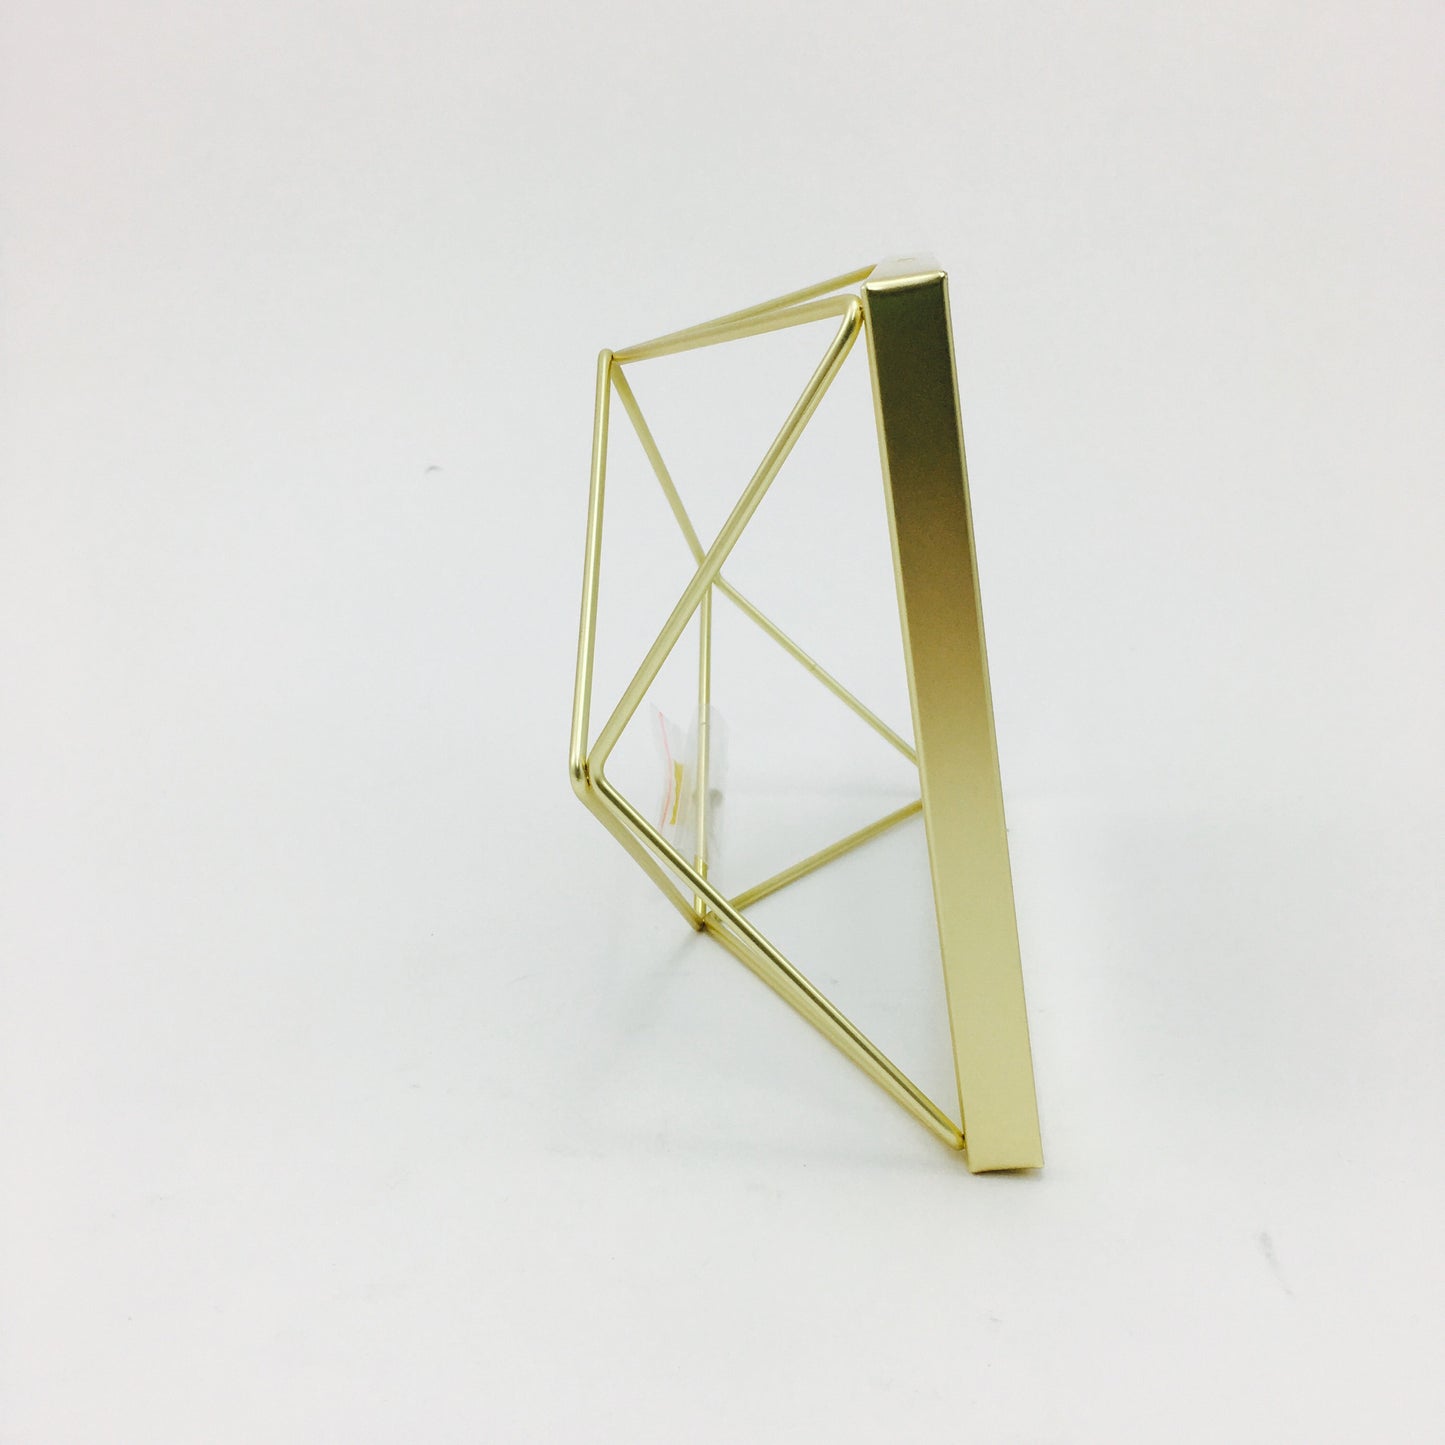 "Prisma" Picture Frames in Matte Brass by Umbra - 4 x 4 inches by Umbra - K. A. Artist Shop